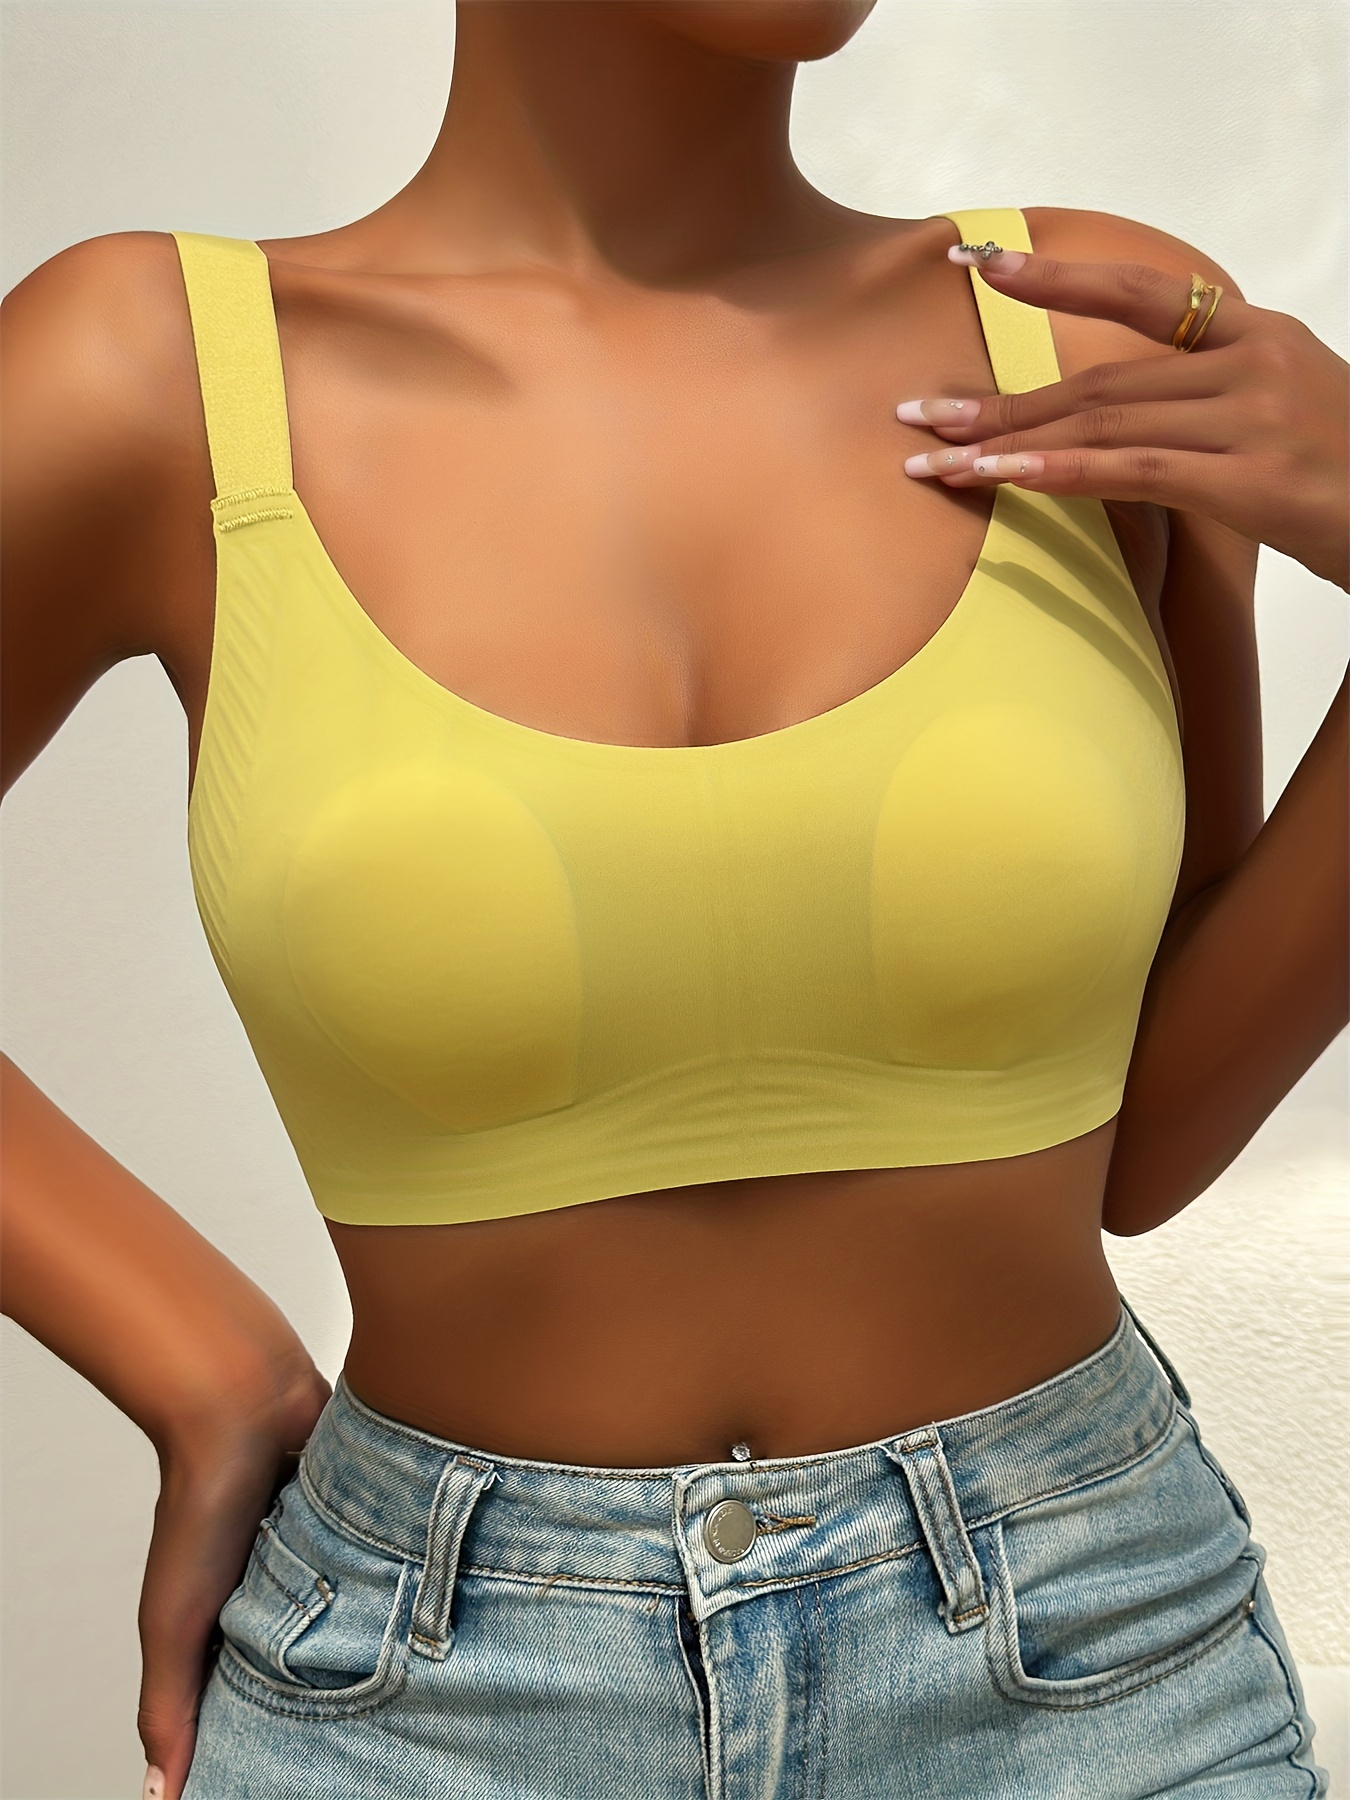 CWCWFHZH Women Front Buckle Close Bra Vest Floral Full Figure Wire Free  Stretchy Cotton Bras Soft Seamless Crop Sports Bra Beige : :  Clothing, Shoes & Accessories